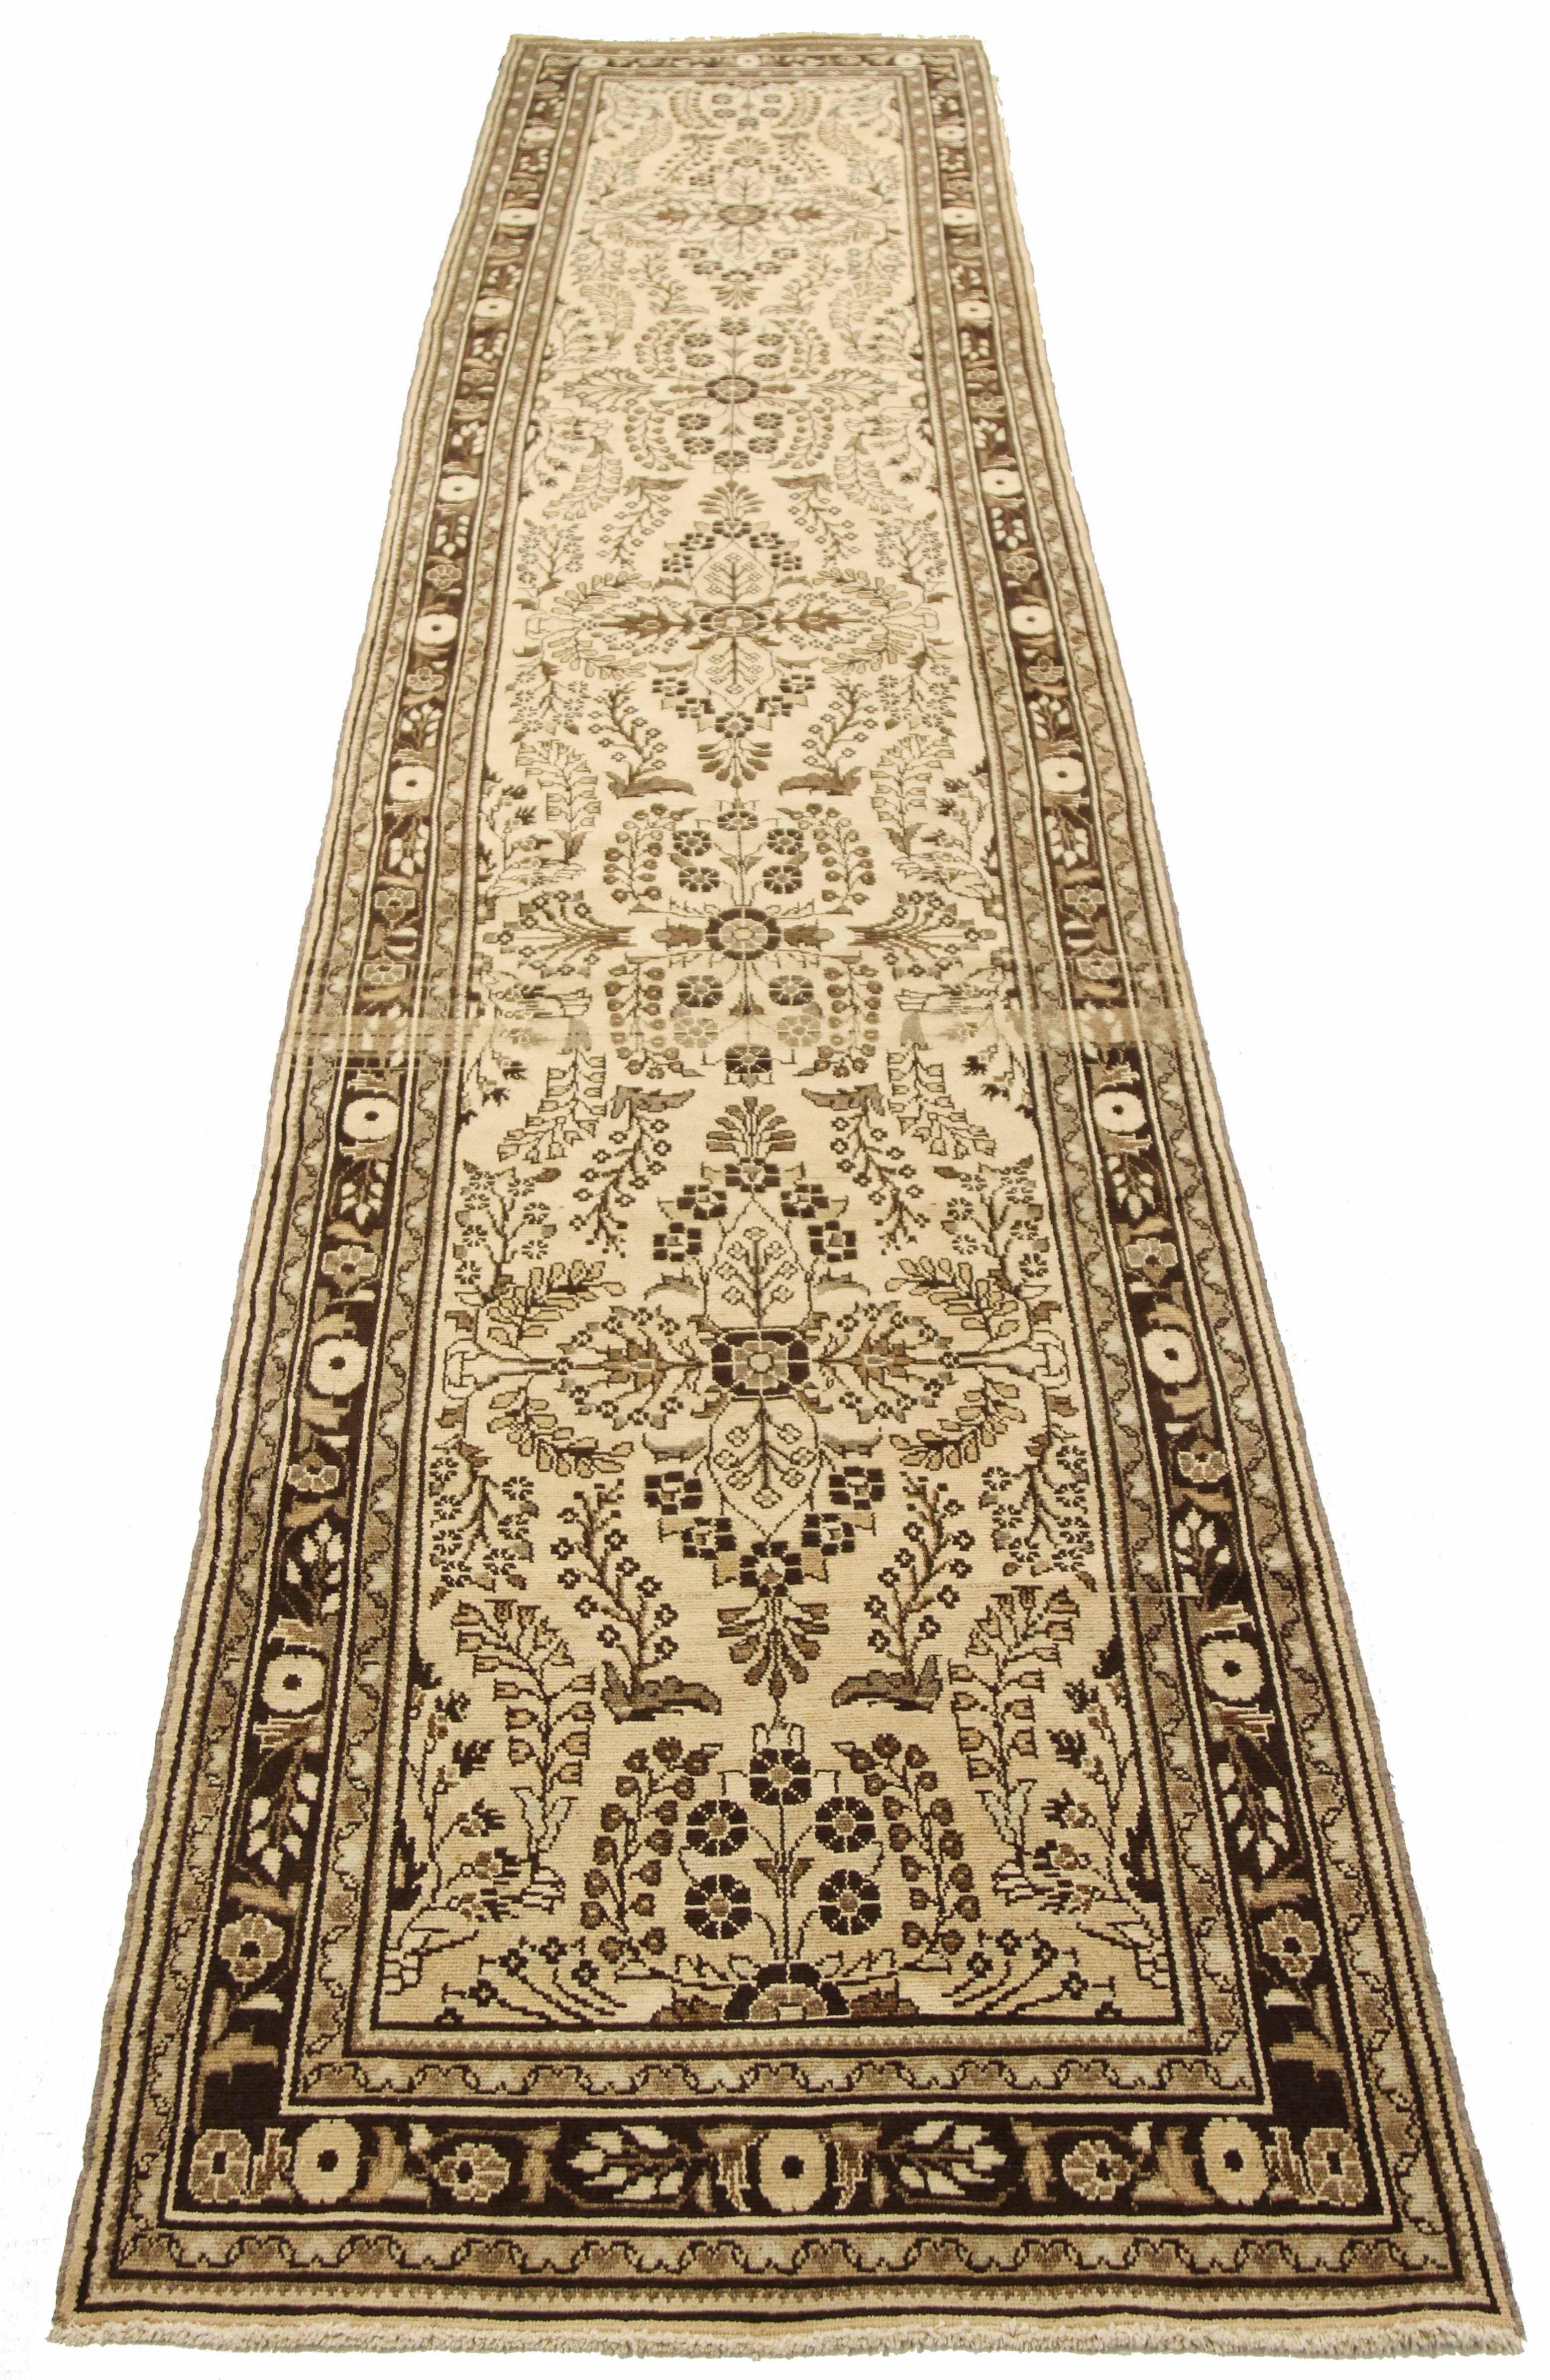 Antique Persian runner rug handwoven from the finest sheep’s wool and colored with all-natural vegetable dyes that are safe for humans and pets. It’s a traditional Malayer design featuring brown botanical details over an ivory field. It’s a lovely